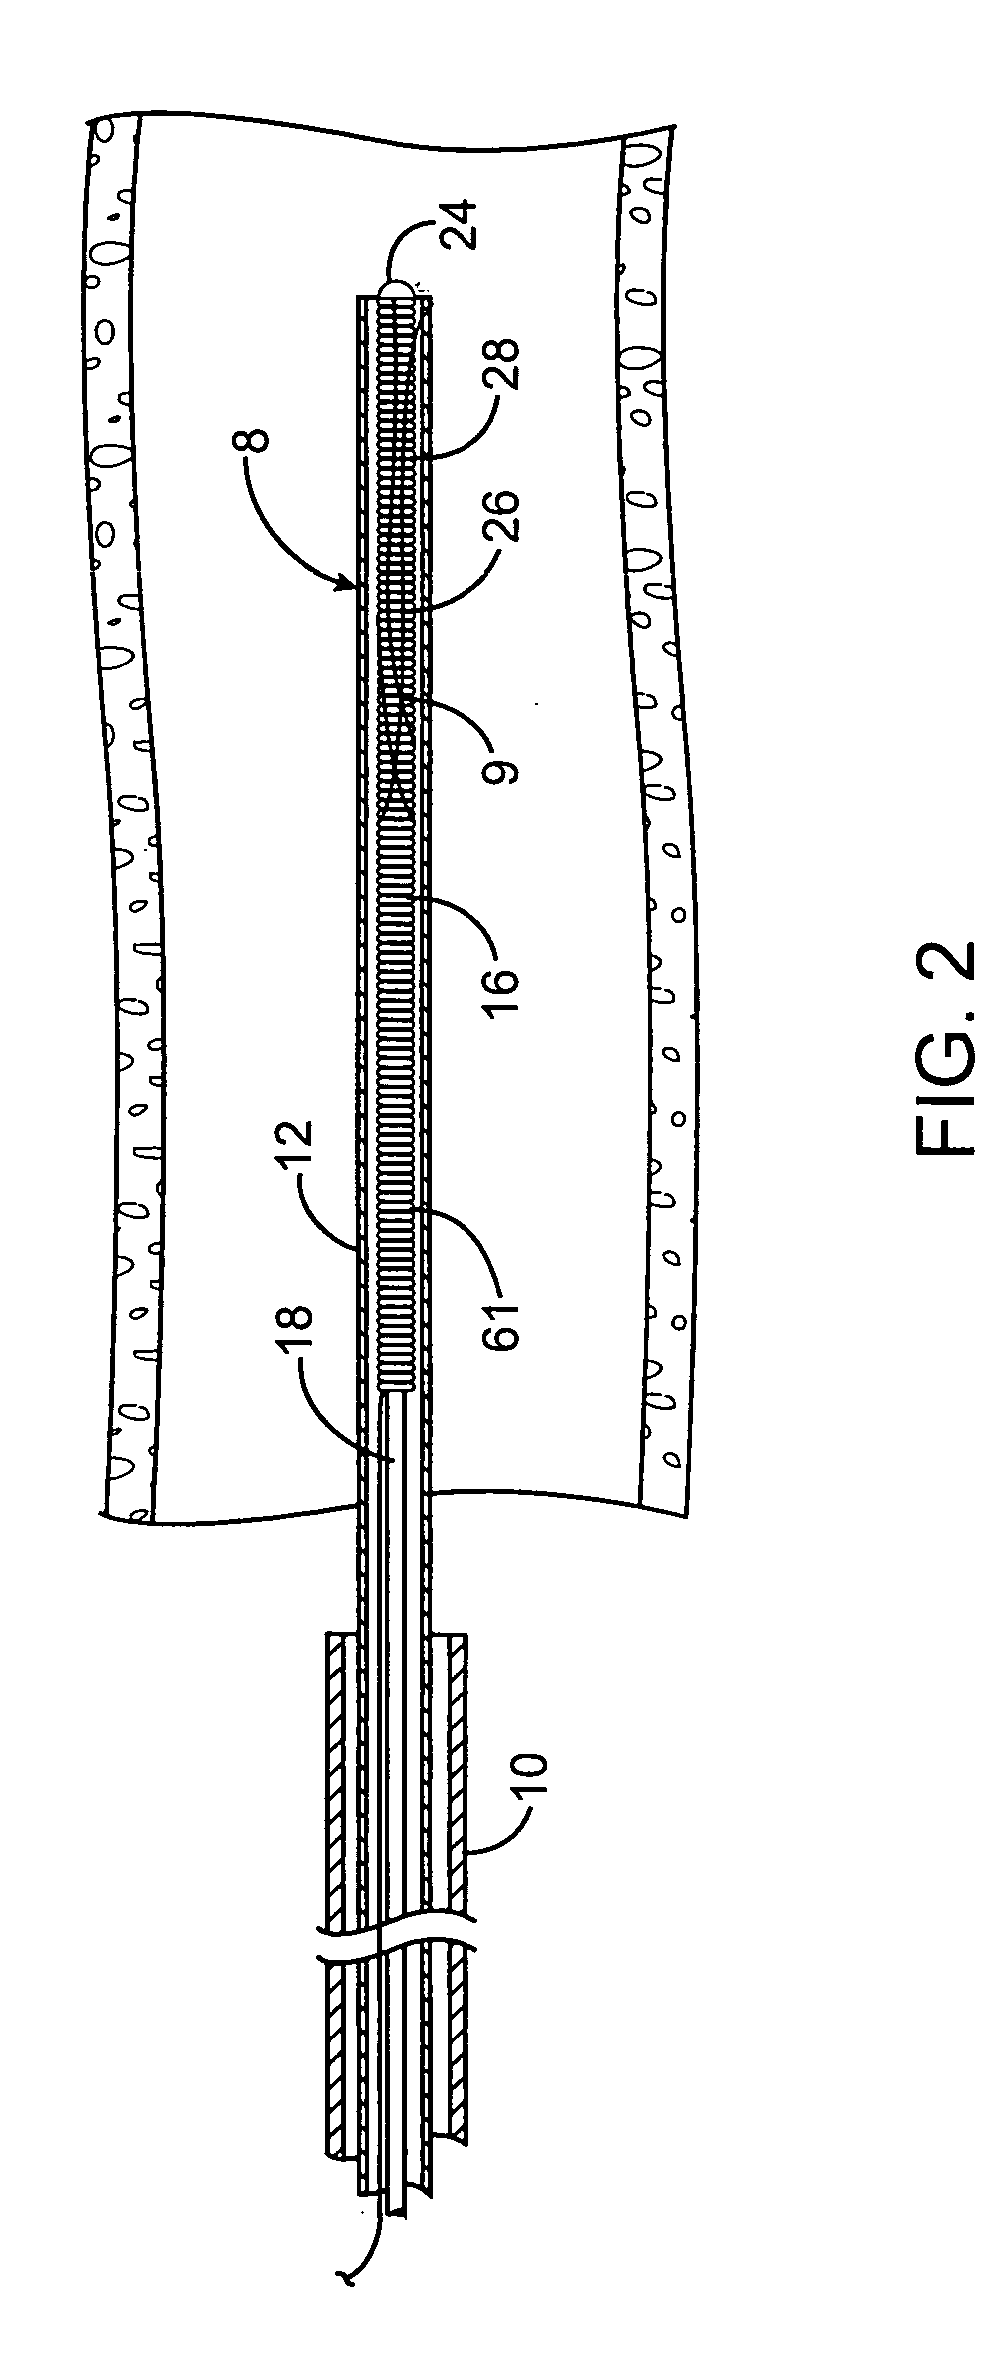 Systems, methods and devices for removing obstructions from a blood vessel